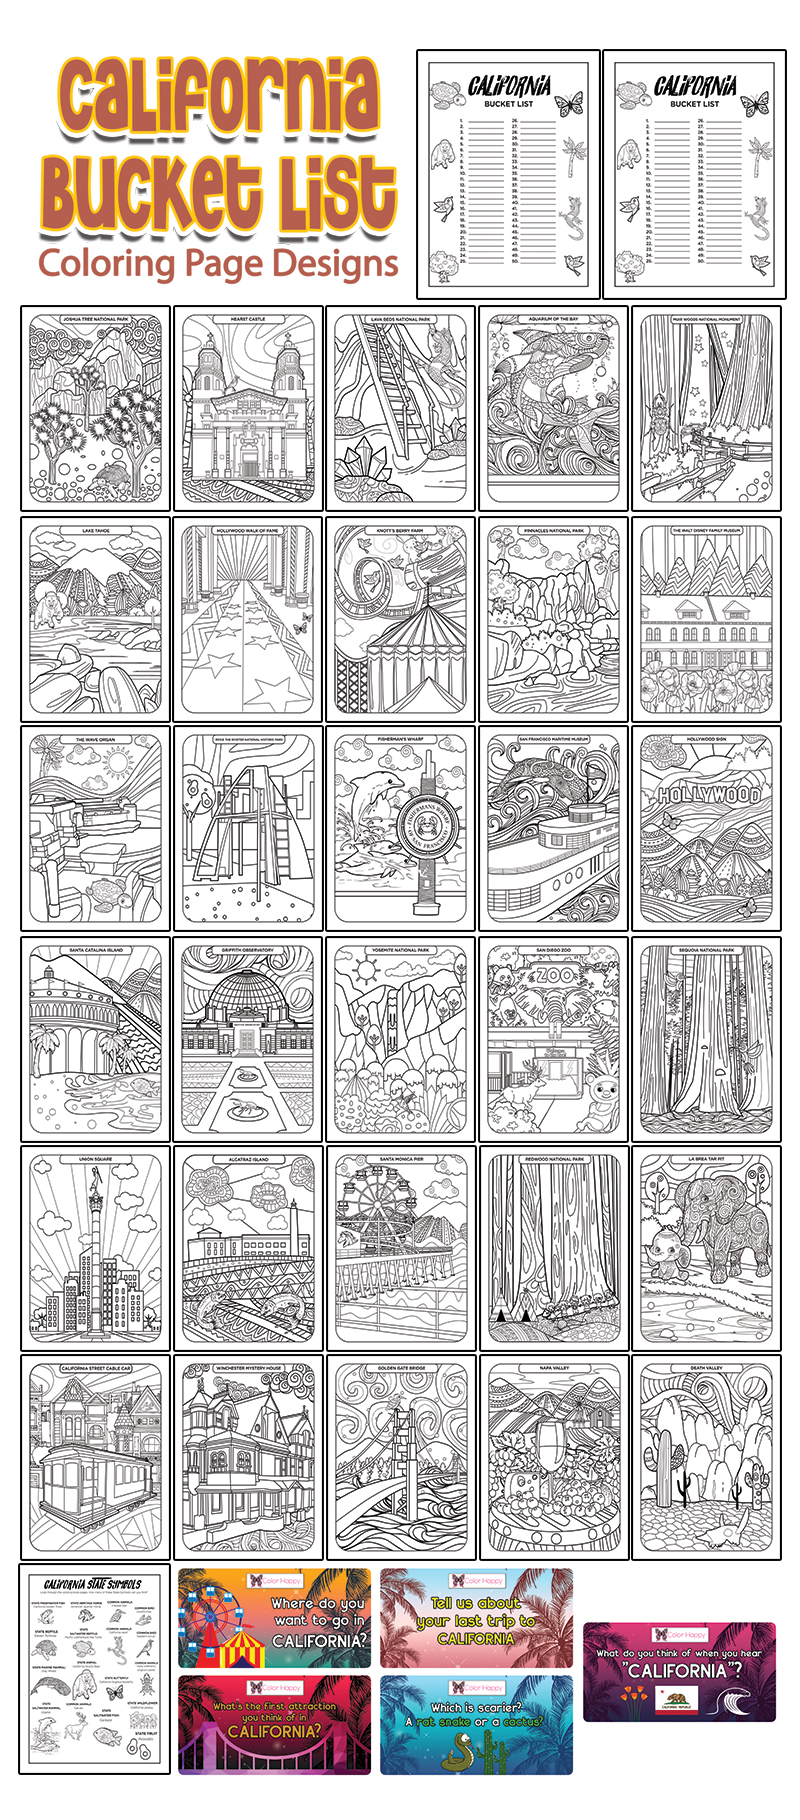 a complete image showing smaller images of all the coloring pages in a package about California bucket list